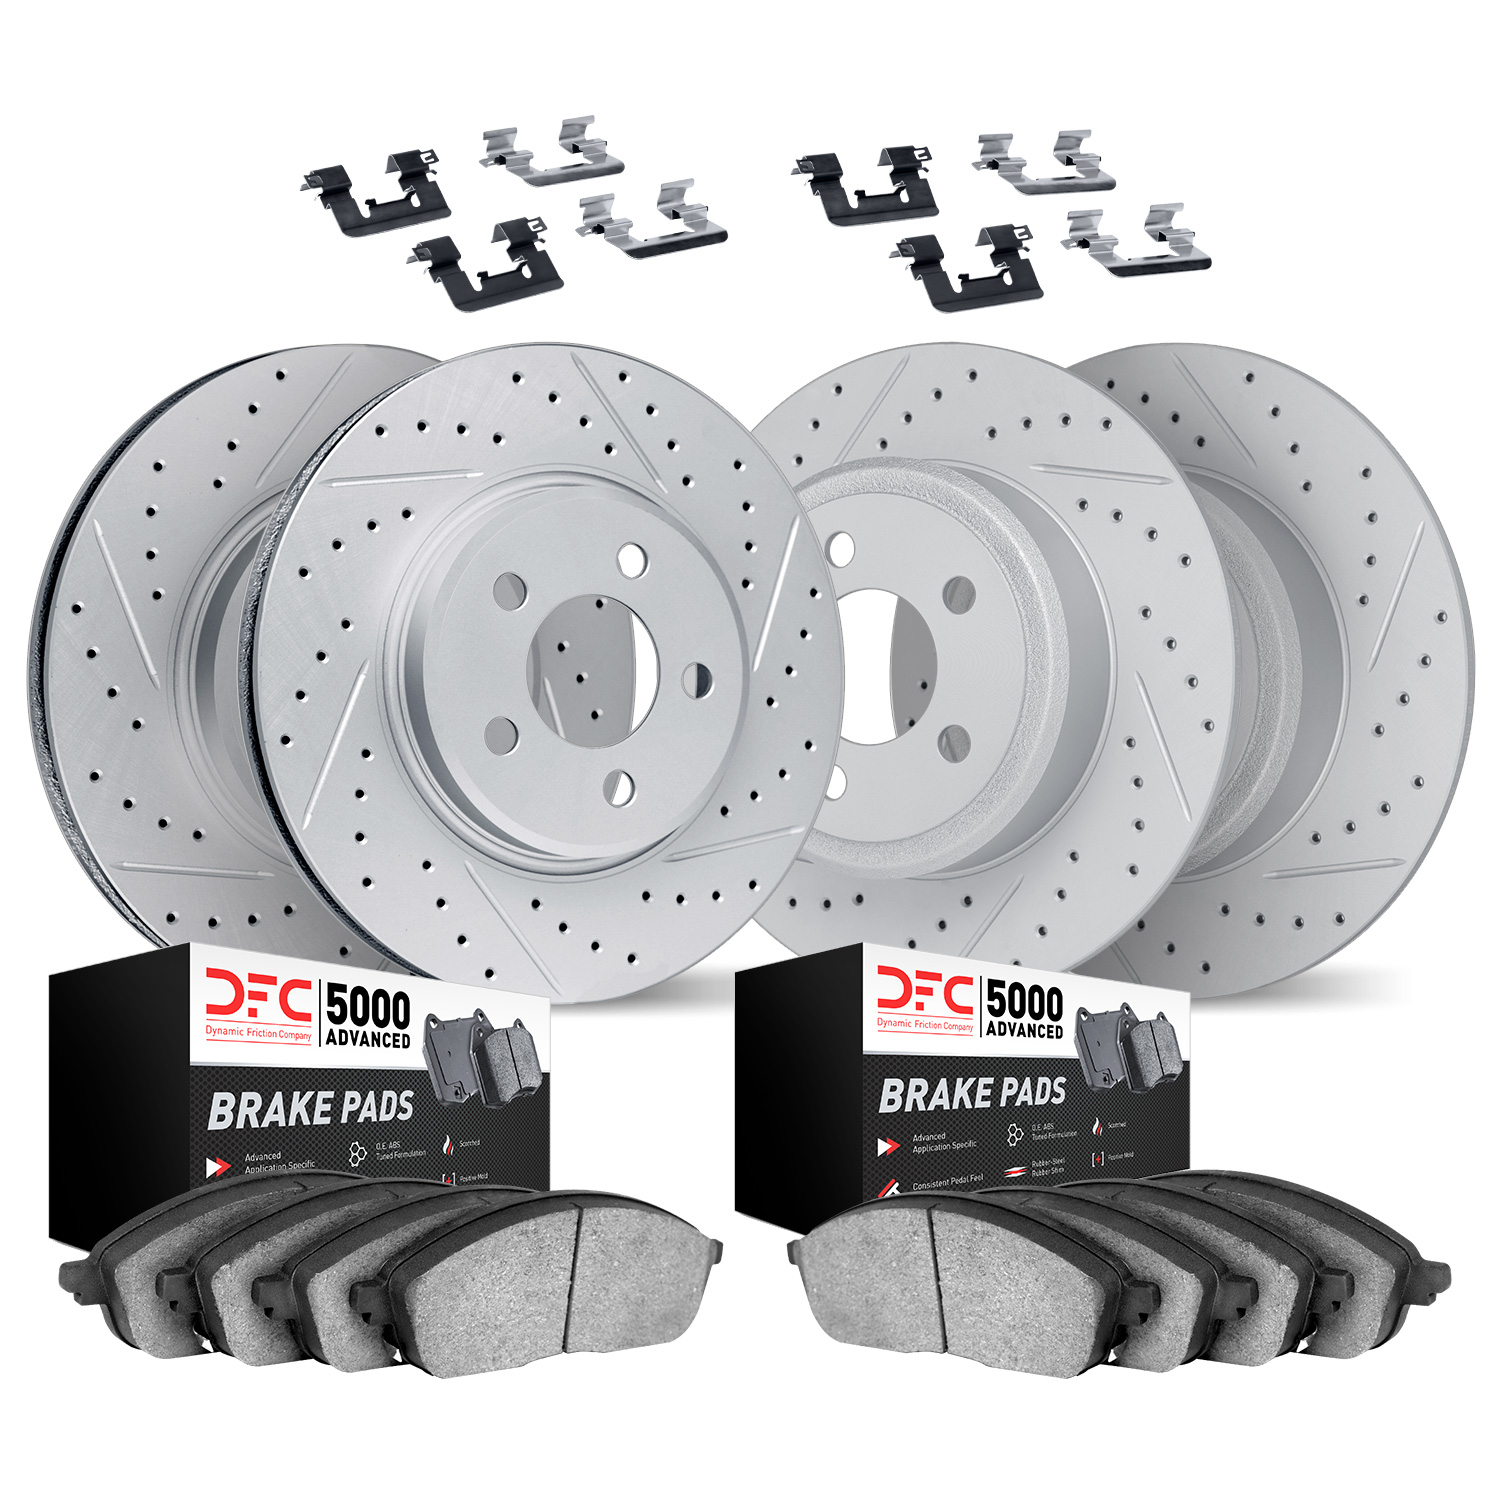 2514-45021 Geoperformance Drilled/Slotted Rotors w/5000 Advanced Brake Pads Kit & Hardware, 2011-2016 GM, Position: Front and Re